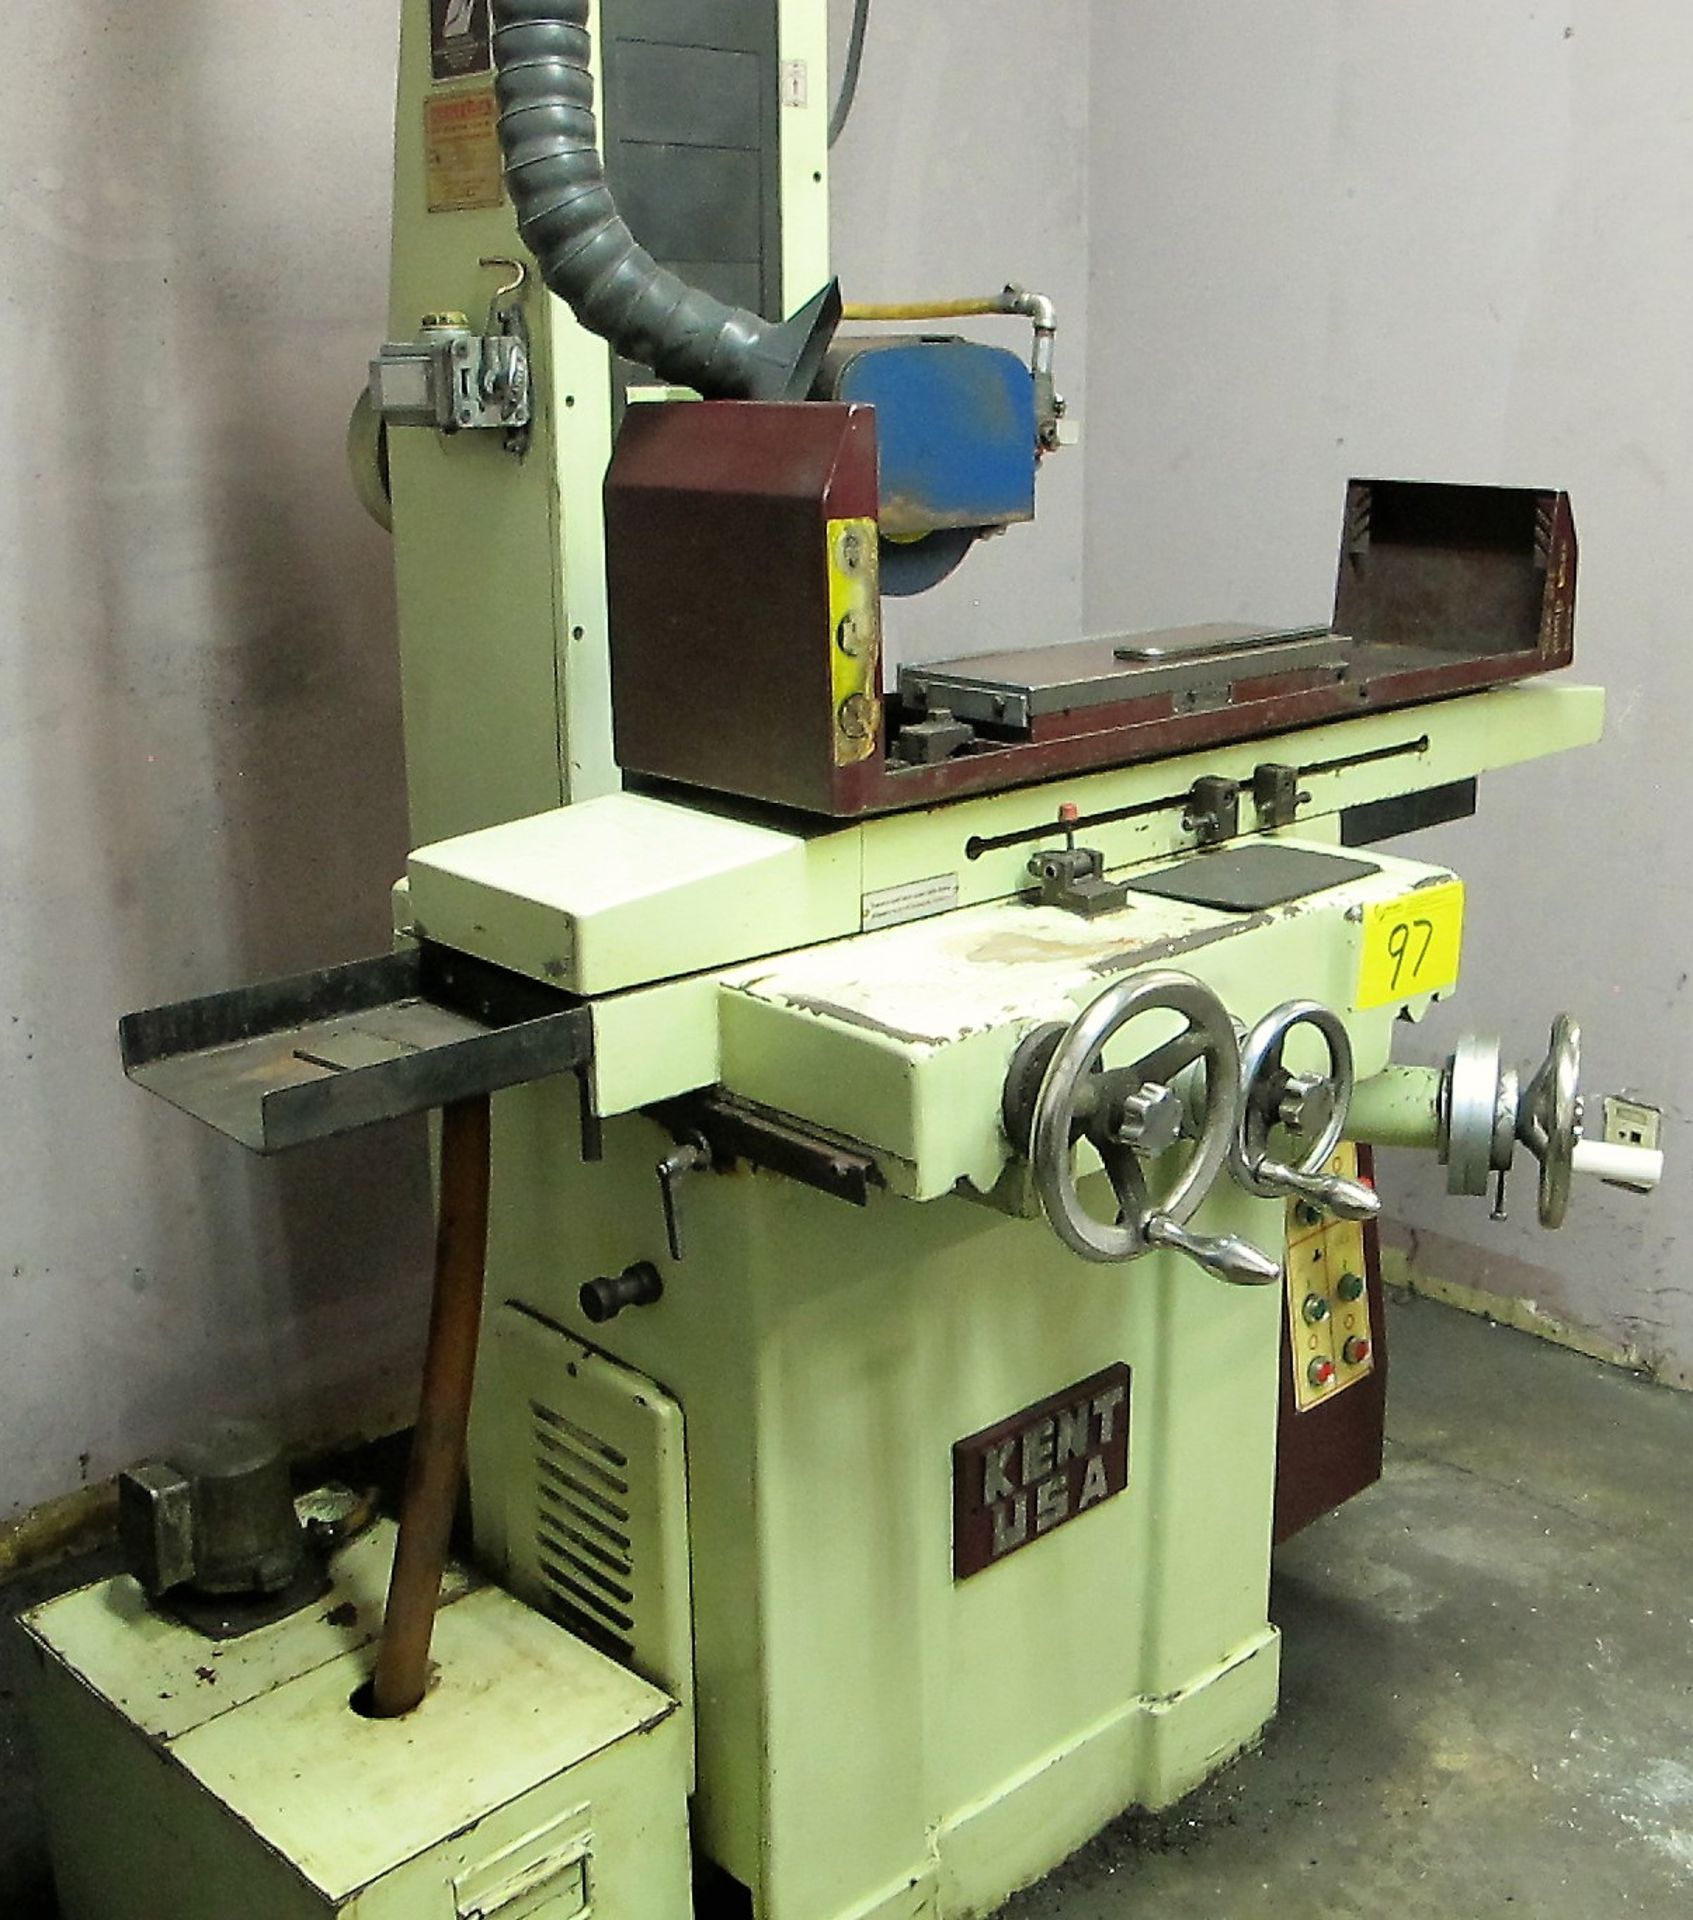 2005 KENT KGS618 SURFACE GRINDER, 6" X 18" MAGNETIC SURFACE PLATE, S/N 150665 - Image 2 of 4